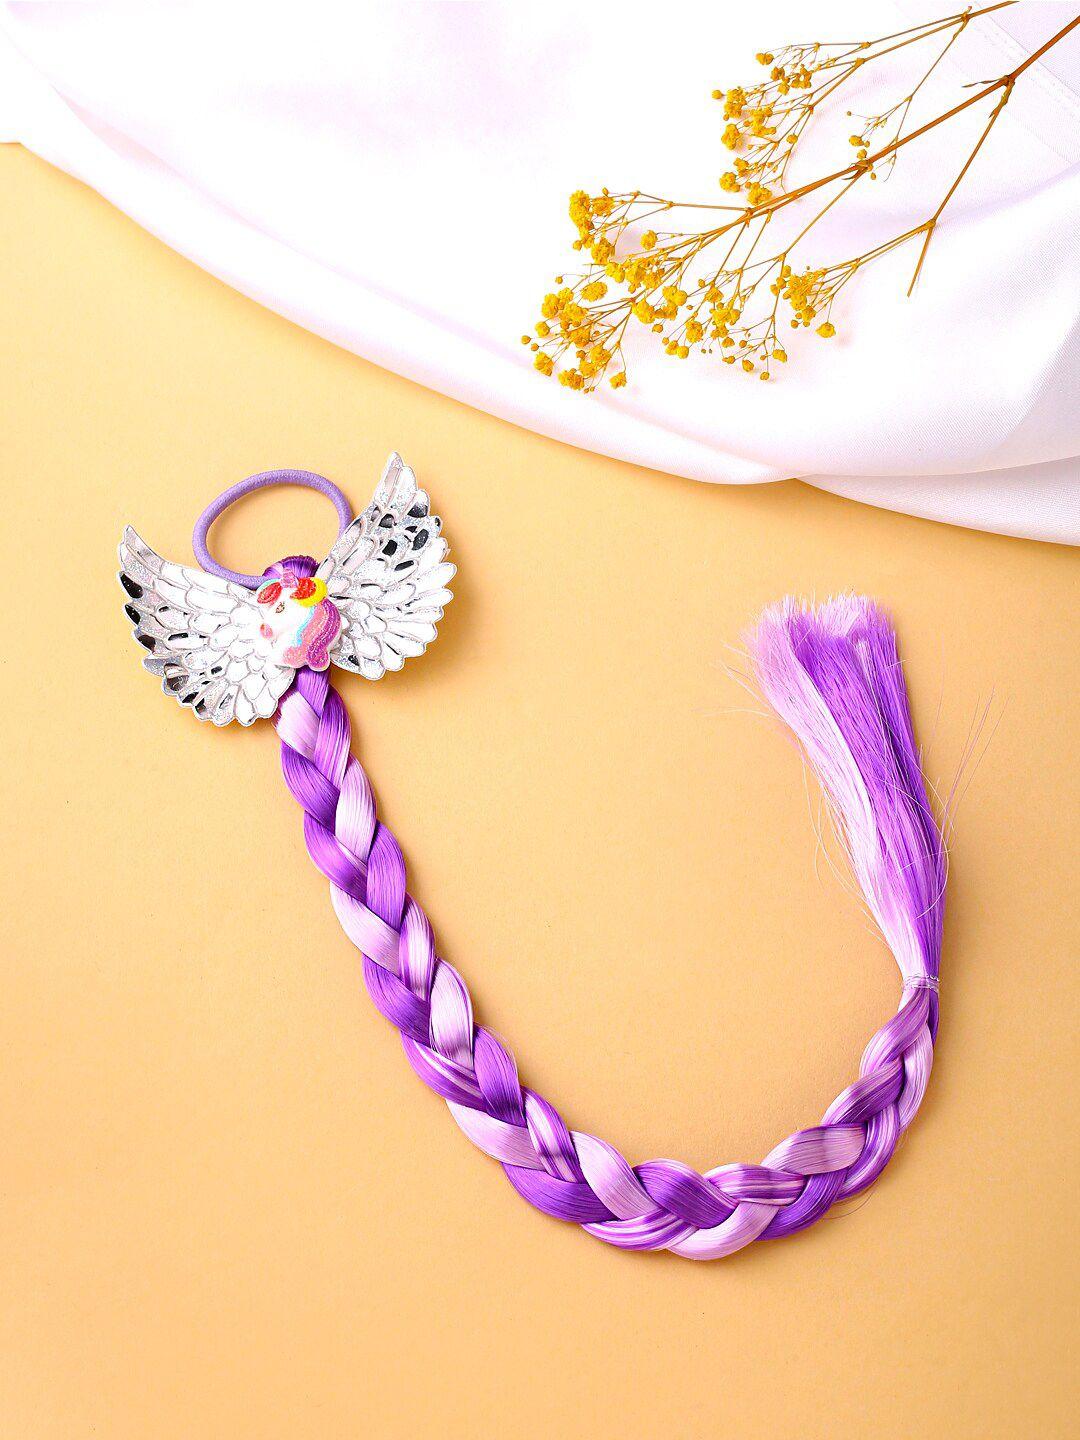 melbees by yellow chimes girls purple & silver-toned unicorn designed hair extension